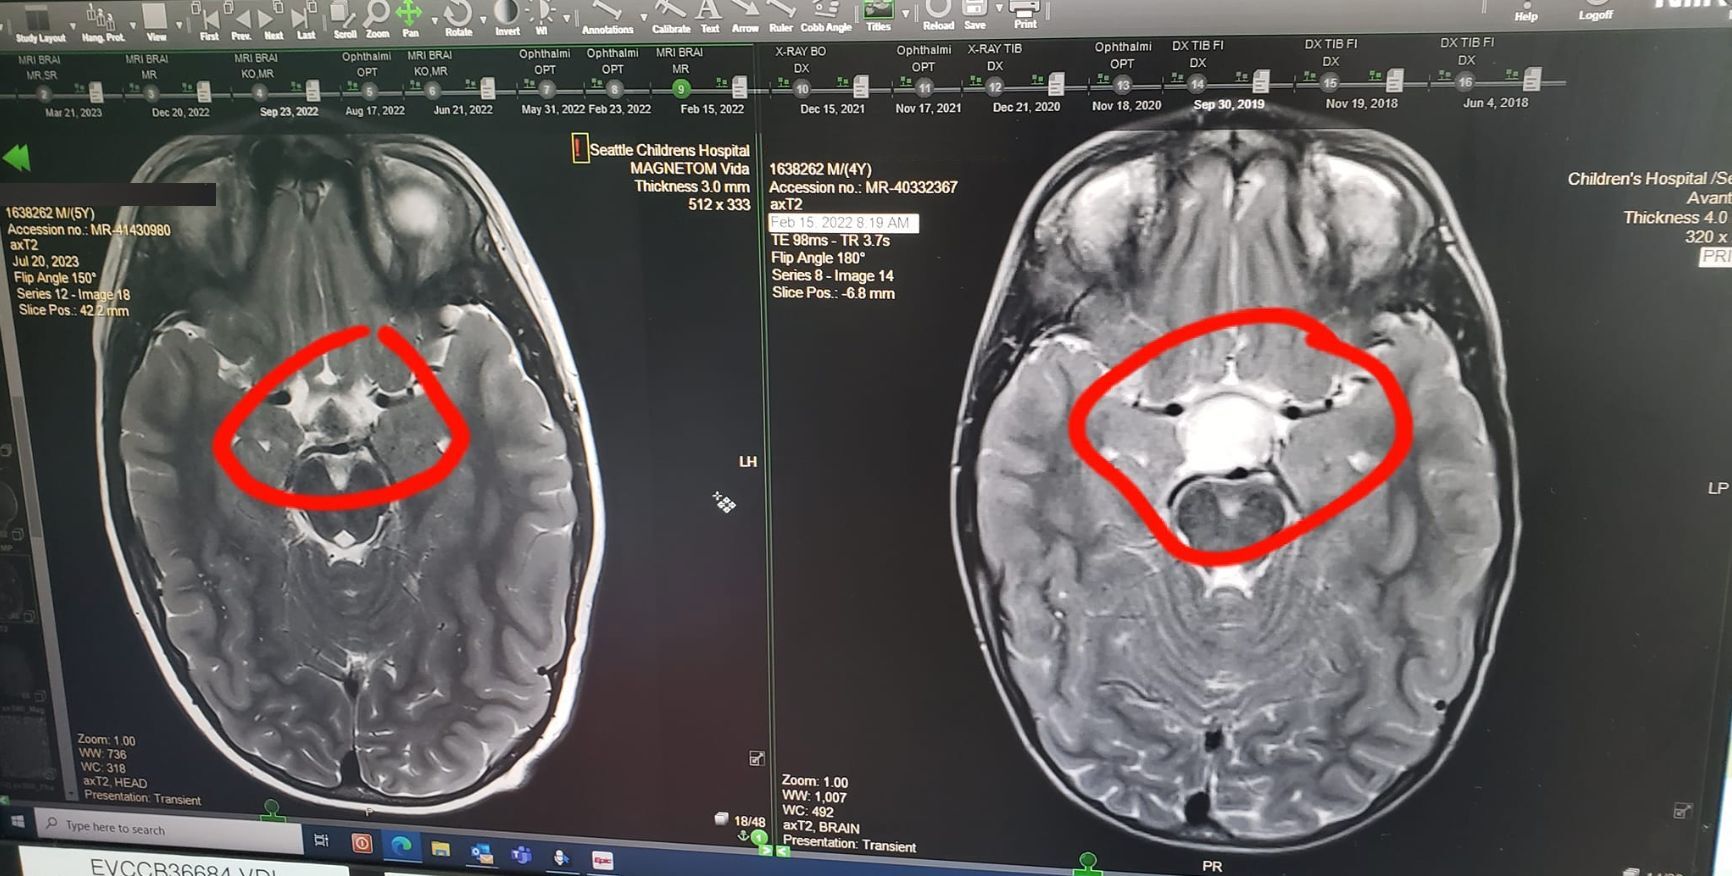 An image of two MRI scans